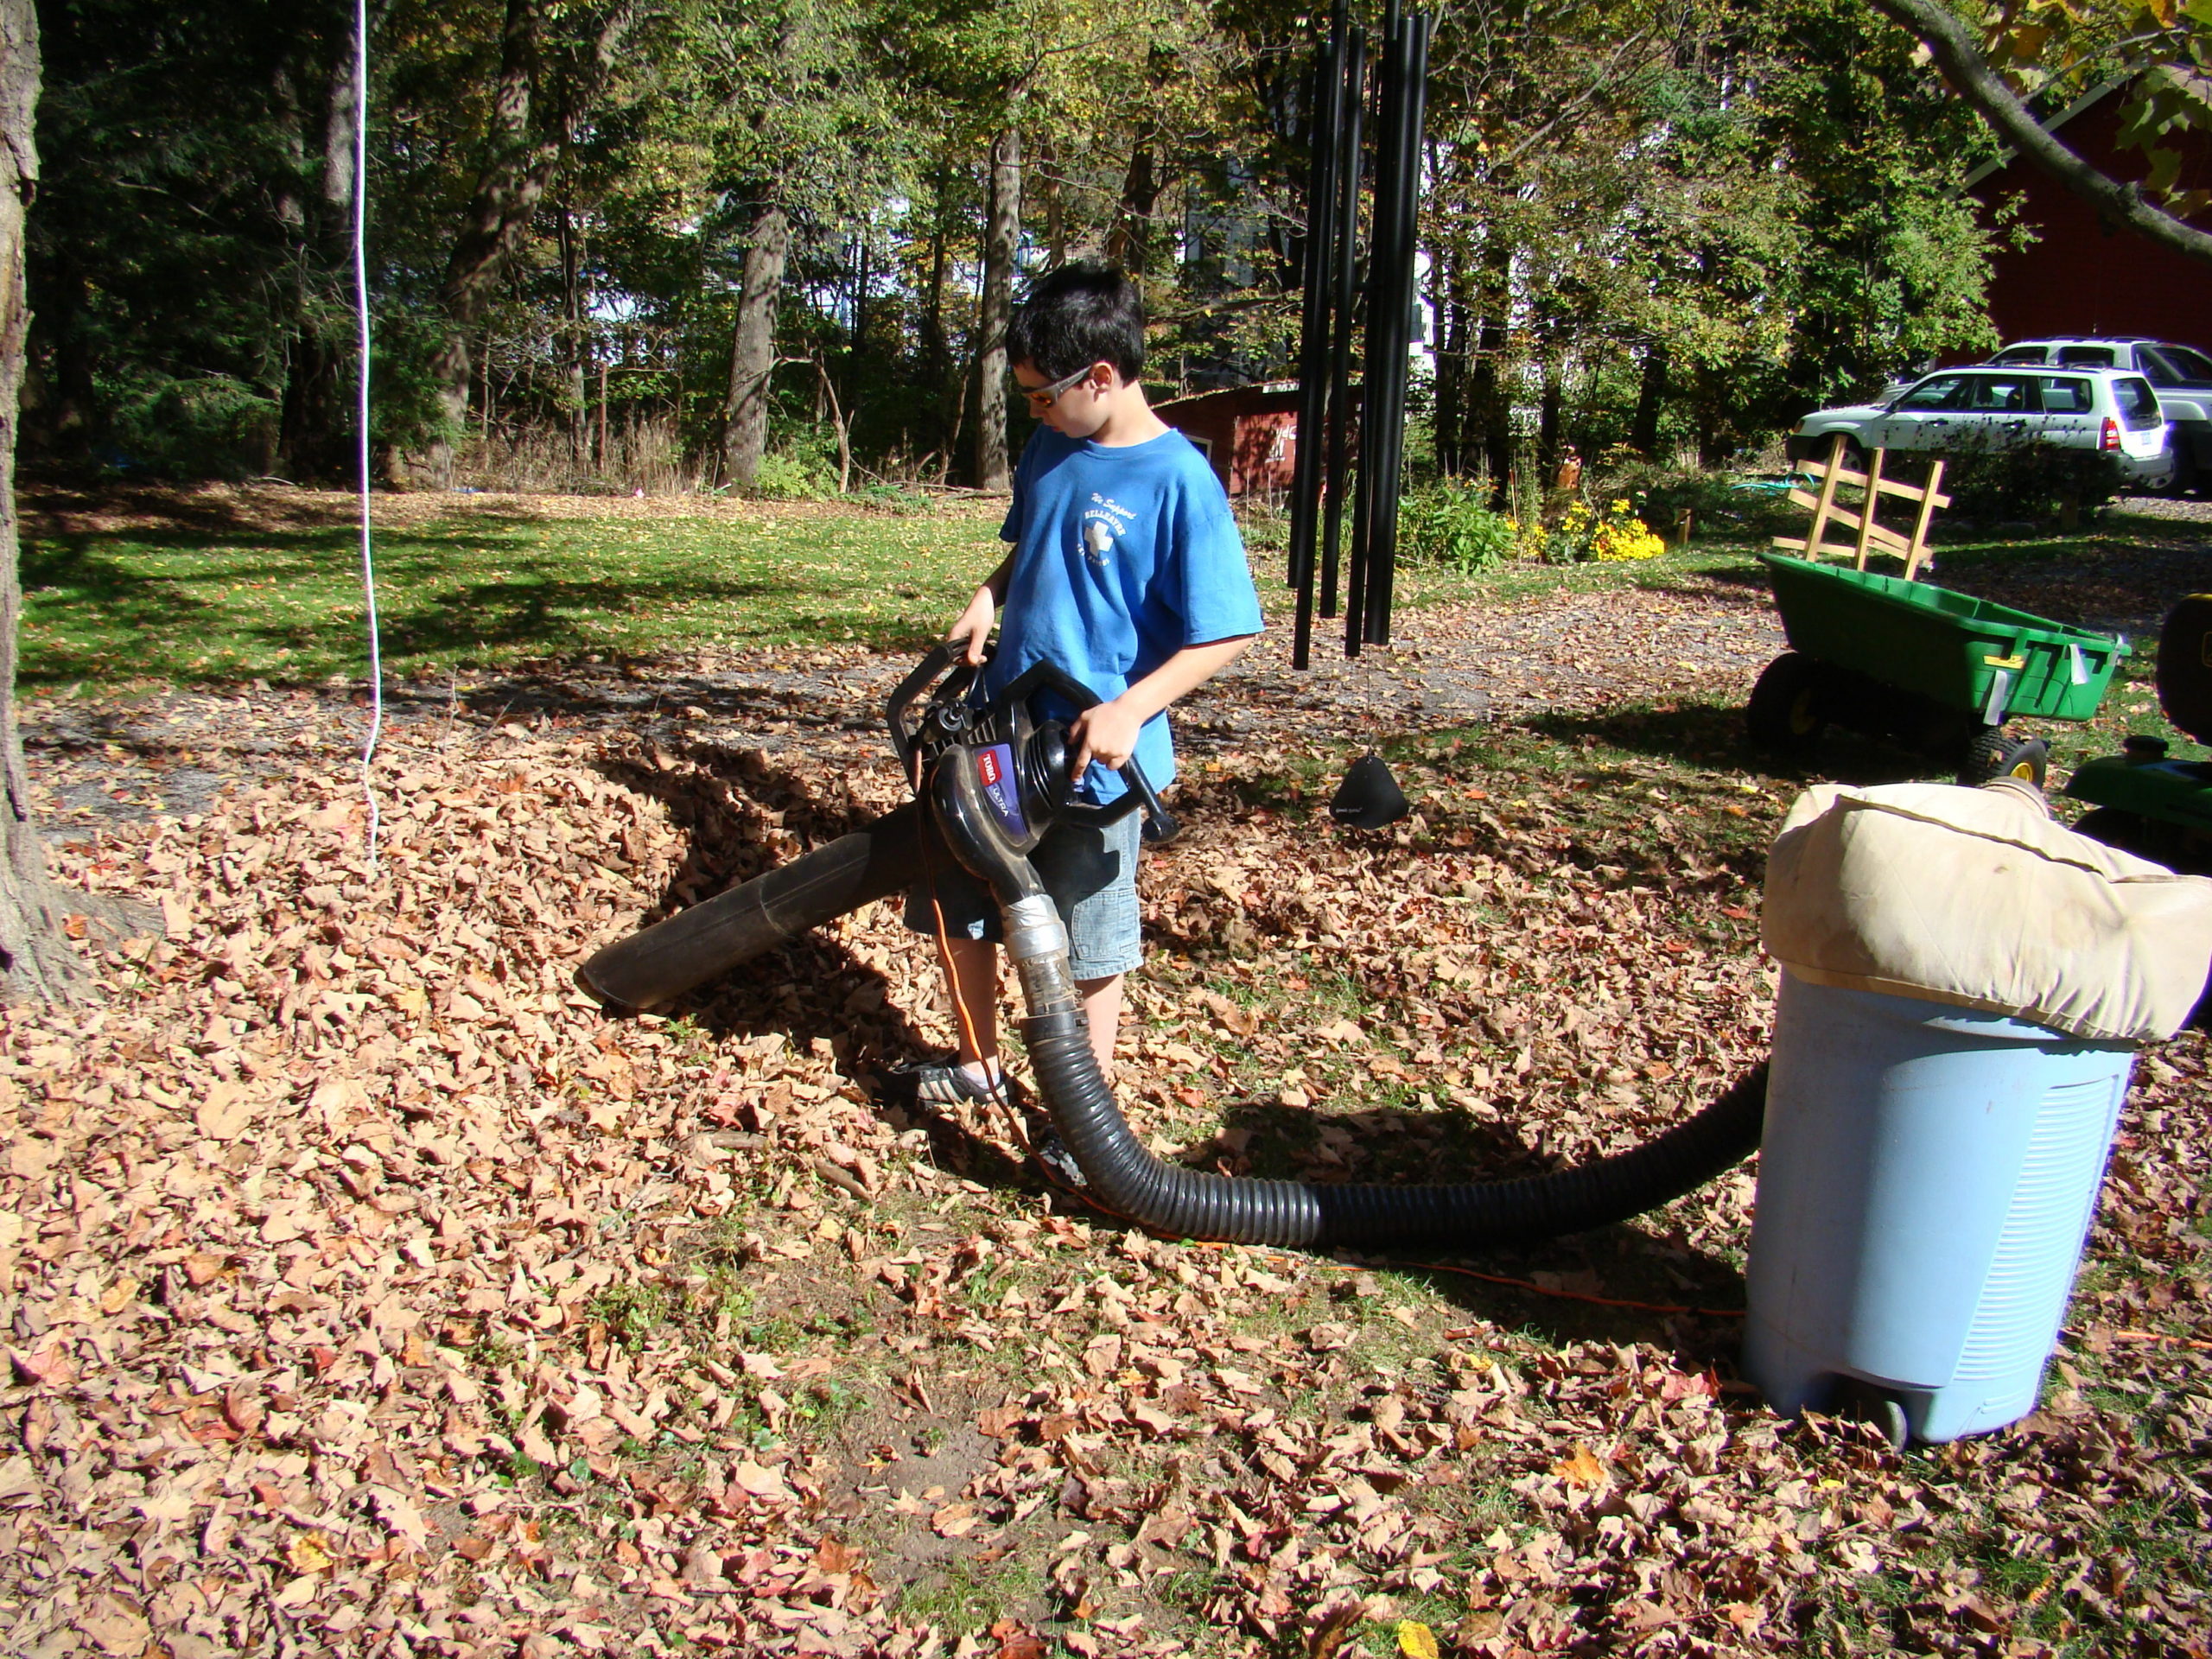 Rake the Leaves? Some Towns Say Mow Them - The New York Times